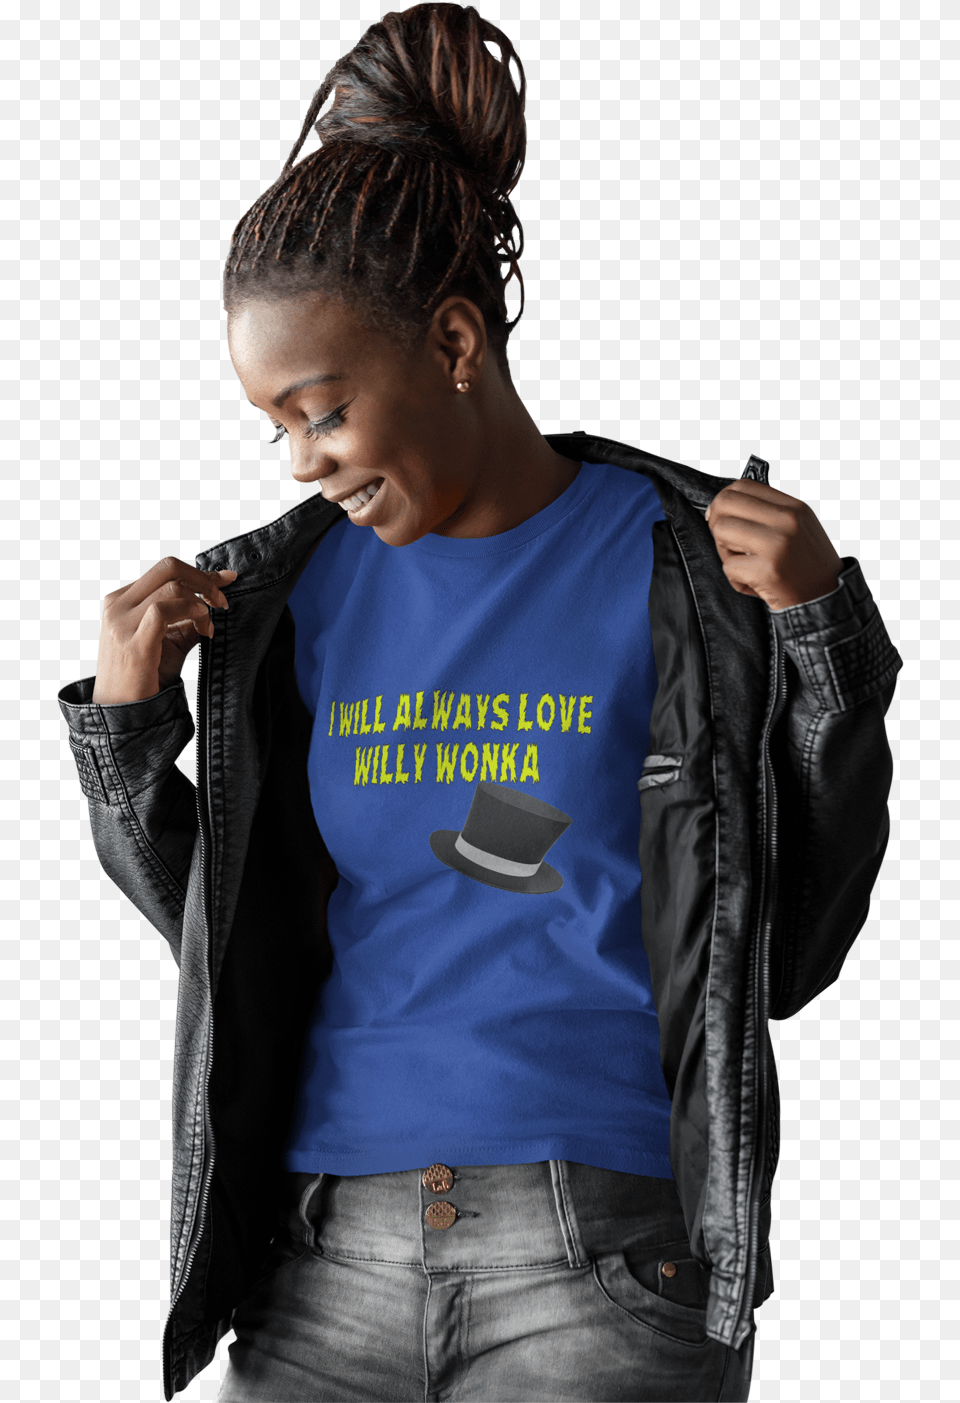 I Will Always Love Willy Wonka Woman T Shirt Mockup Jacket, Clothing, Coat, Pants, Jeans Free Png